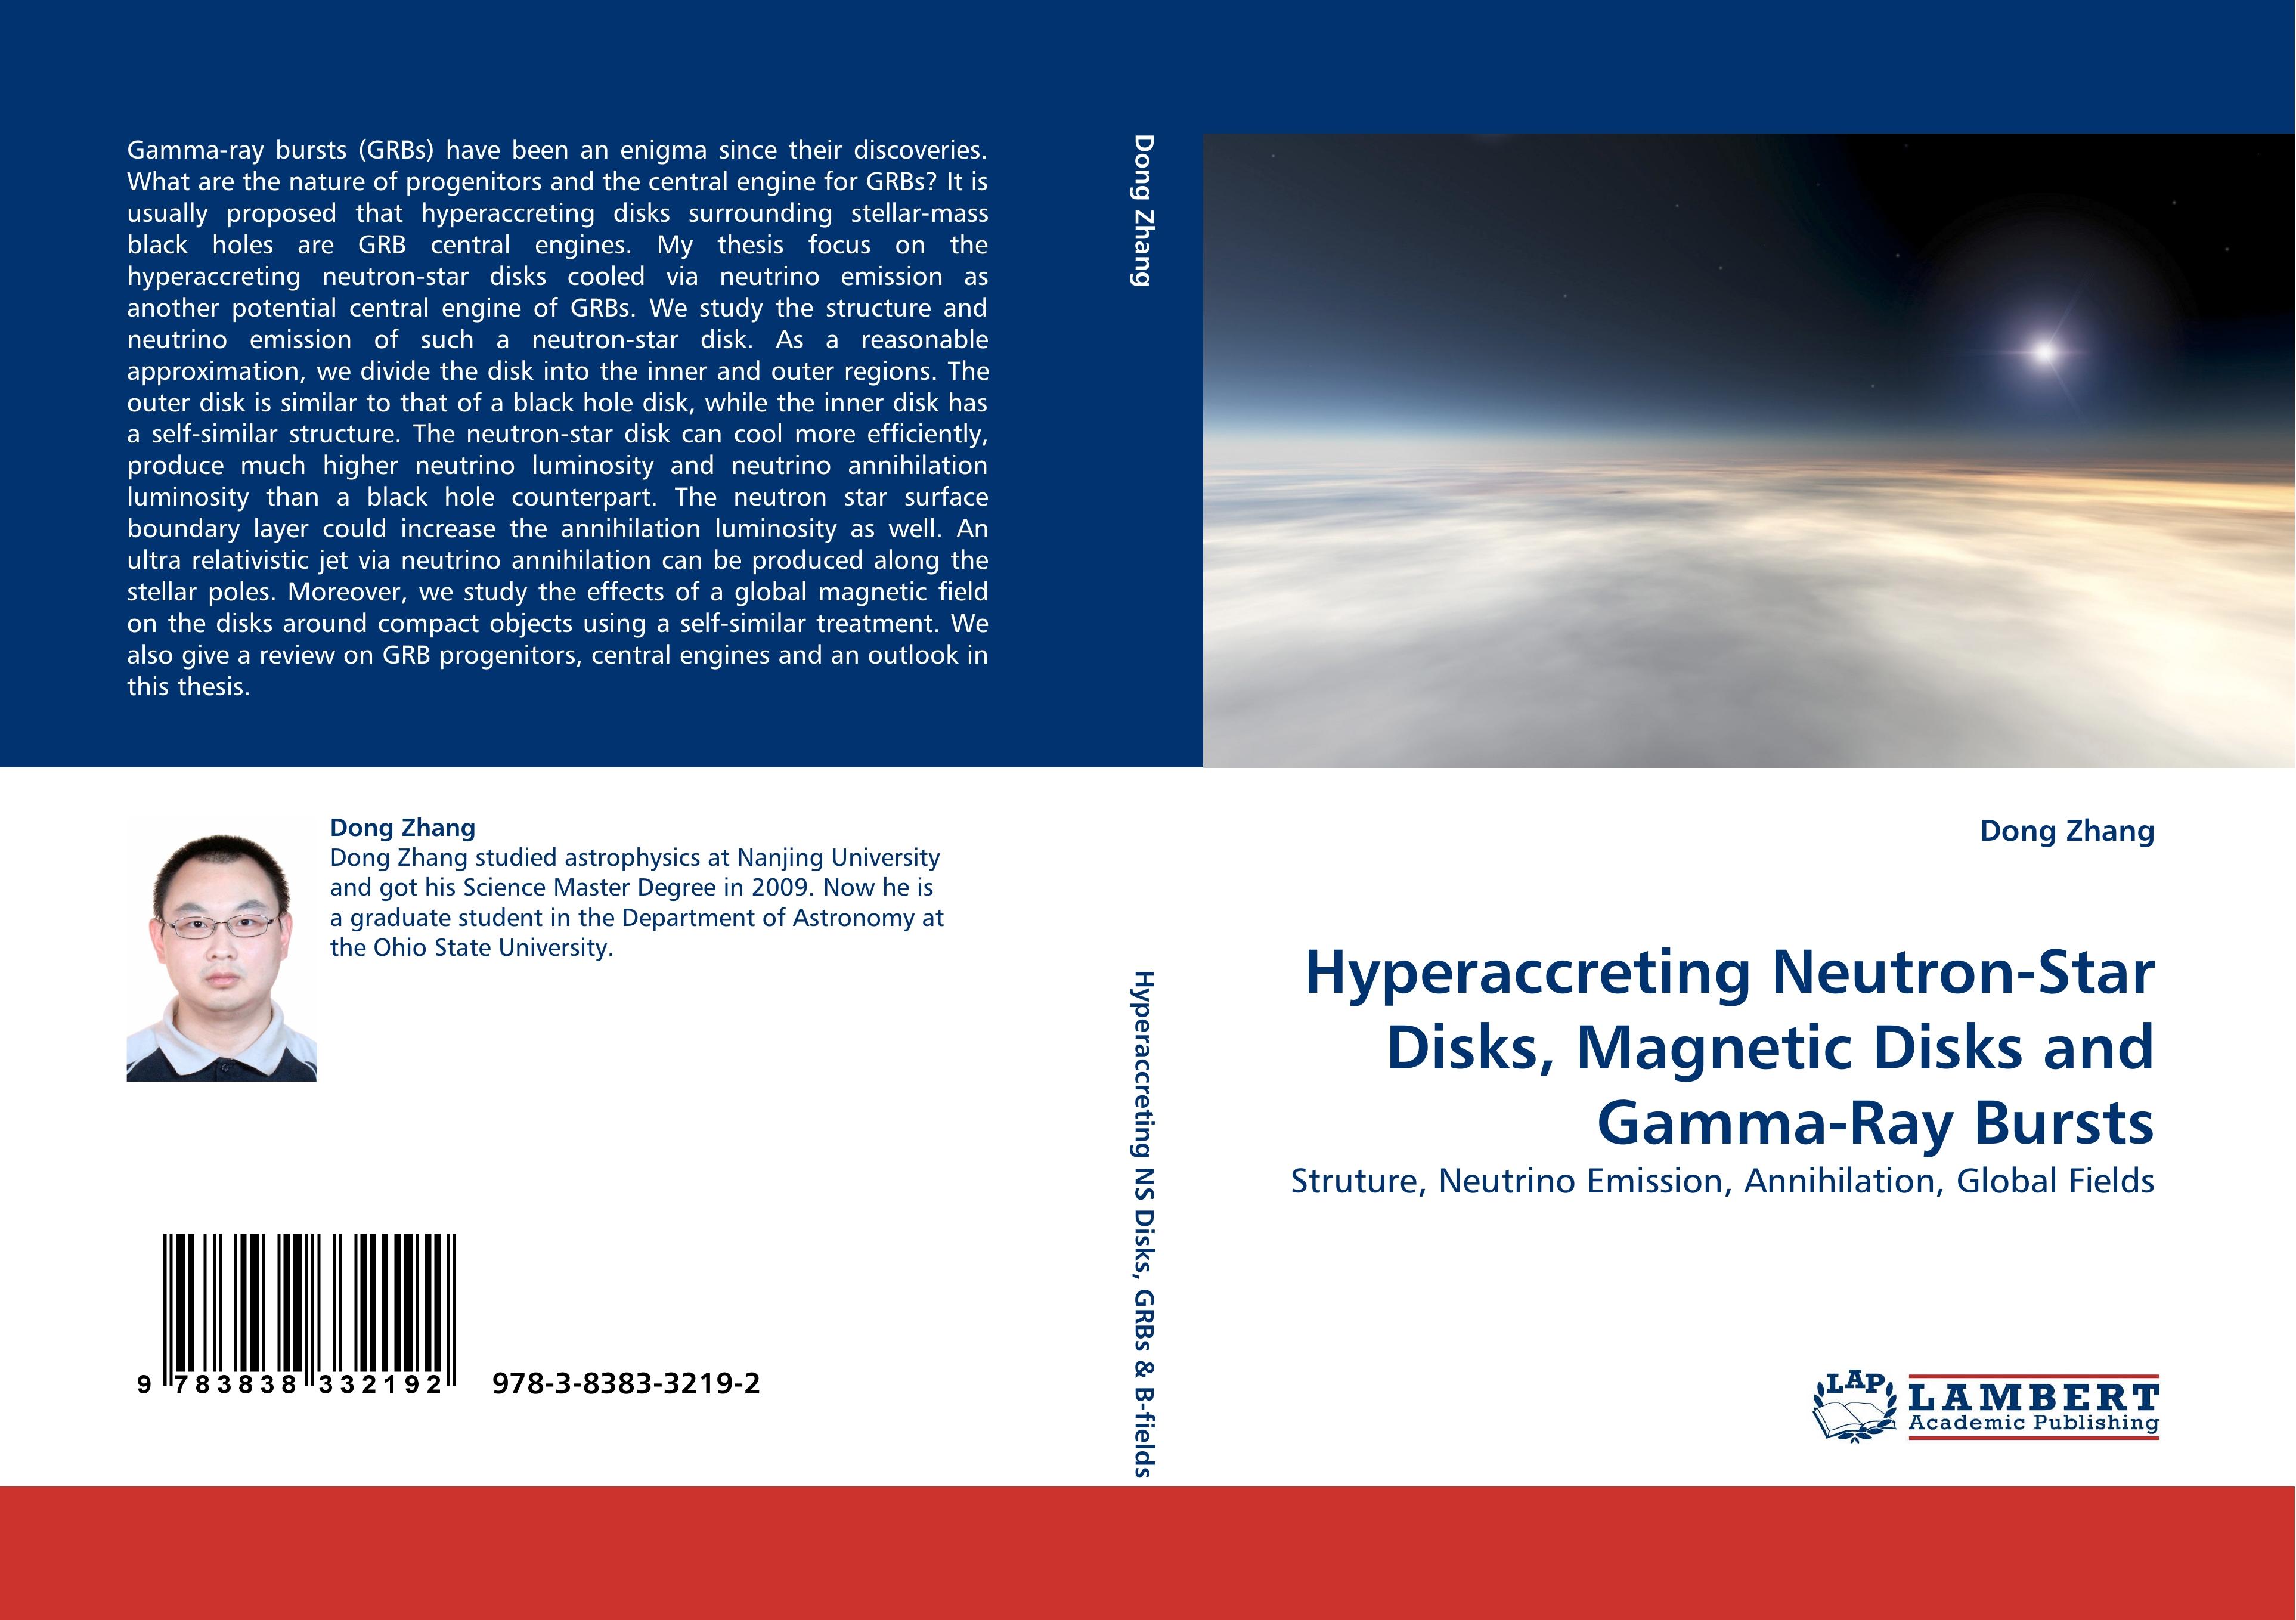 Hyperaccreting Neutron-Star Disks, Magnetic Disks and Gamma-Ray Bursts - Dong Zhang